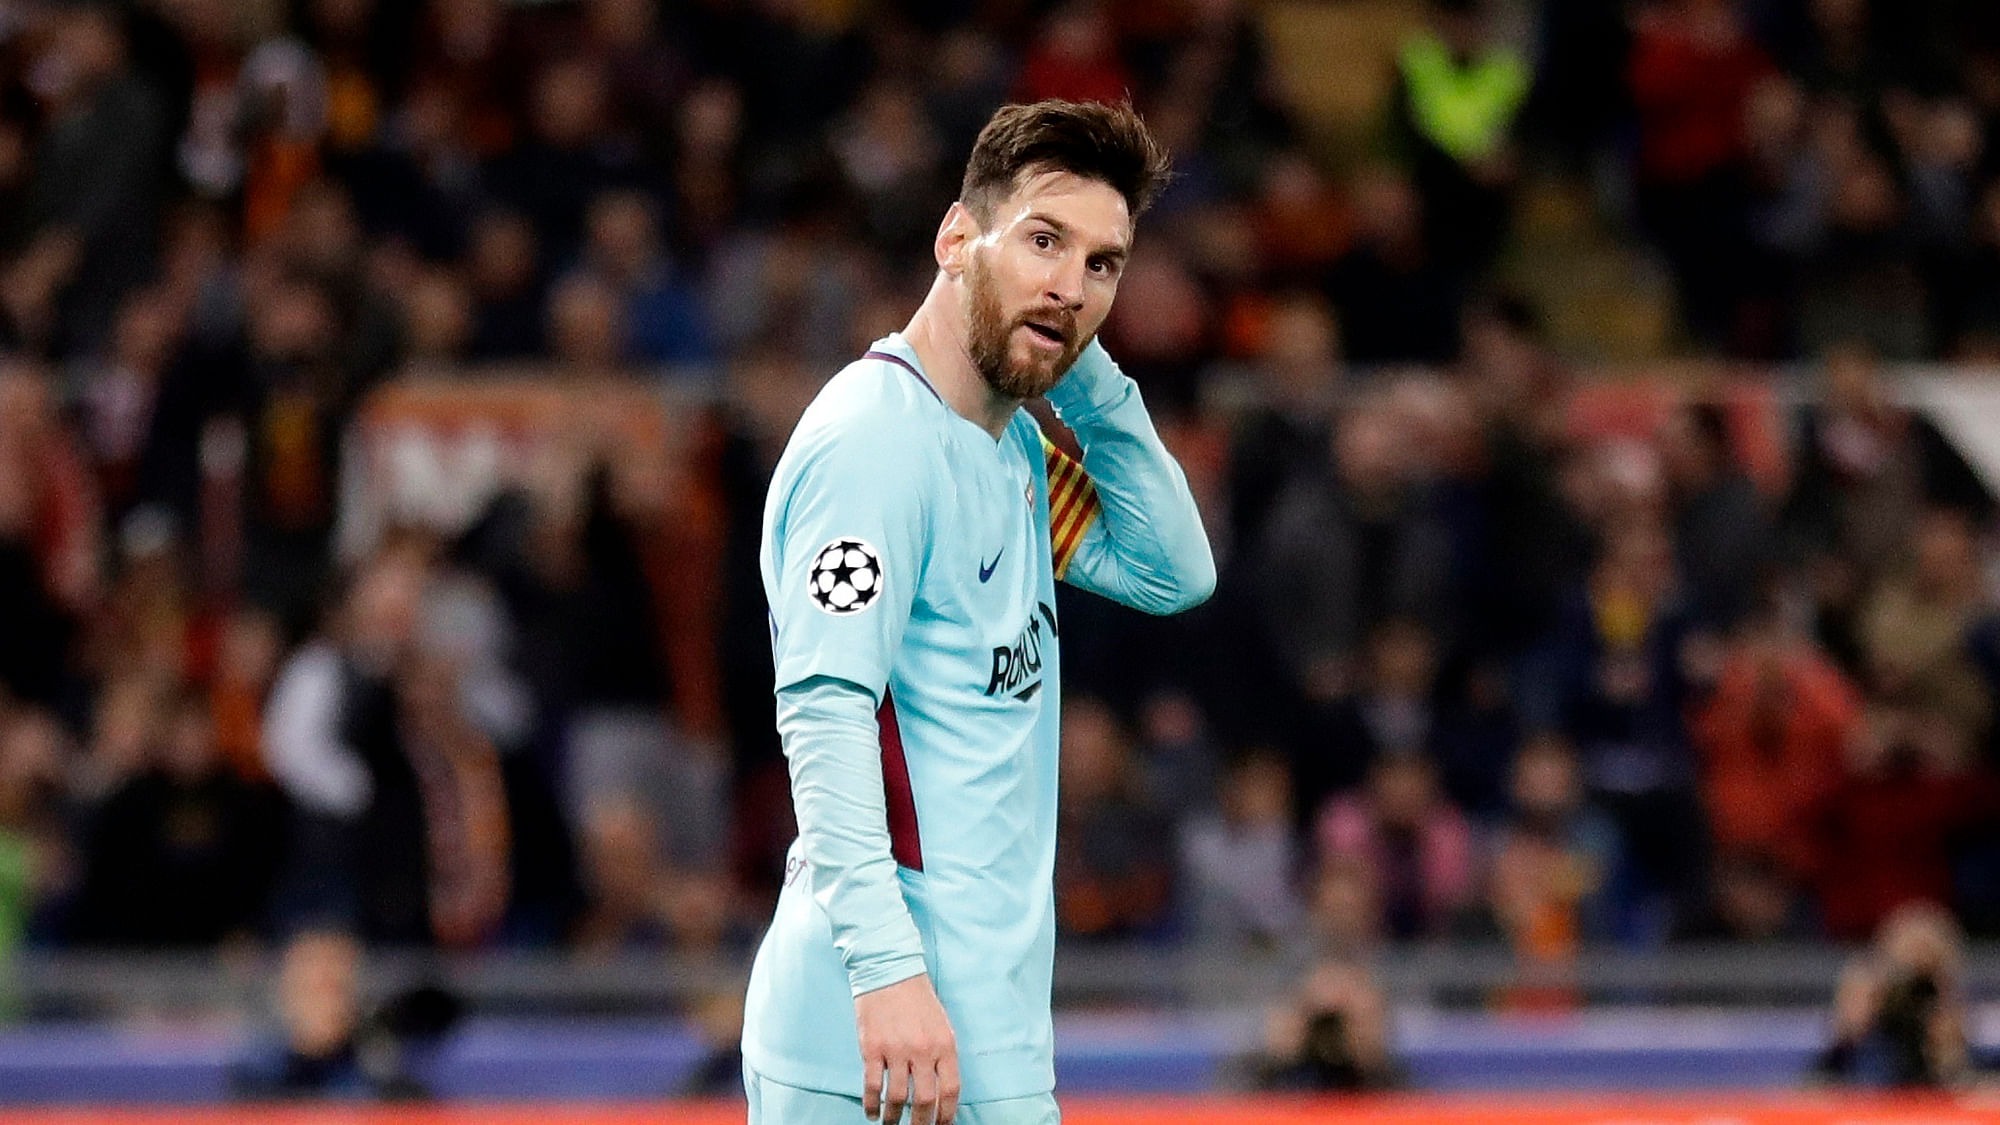 Barcelona’s Lionel Messi reacts after missing a scoring chance during the Champions League quarterfinal second leg soccer match between Roma and FC Barcelona at Rome’s Olympic Stadium, Tuesday, April 10, 2018.